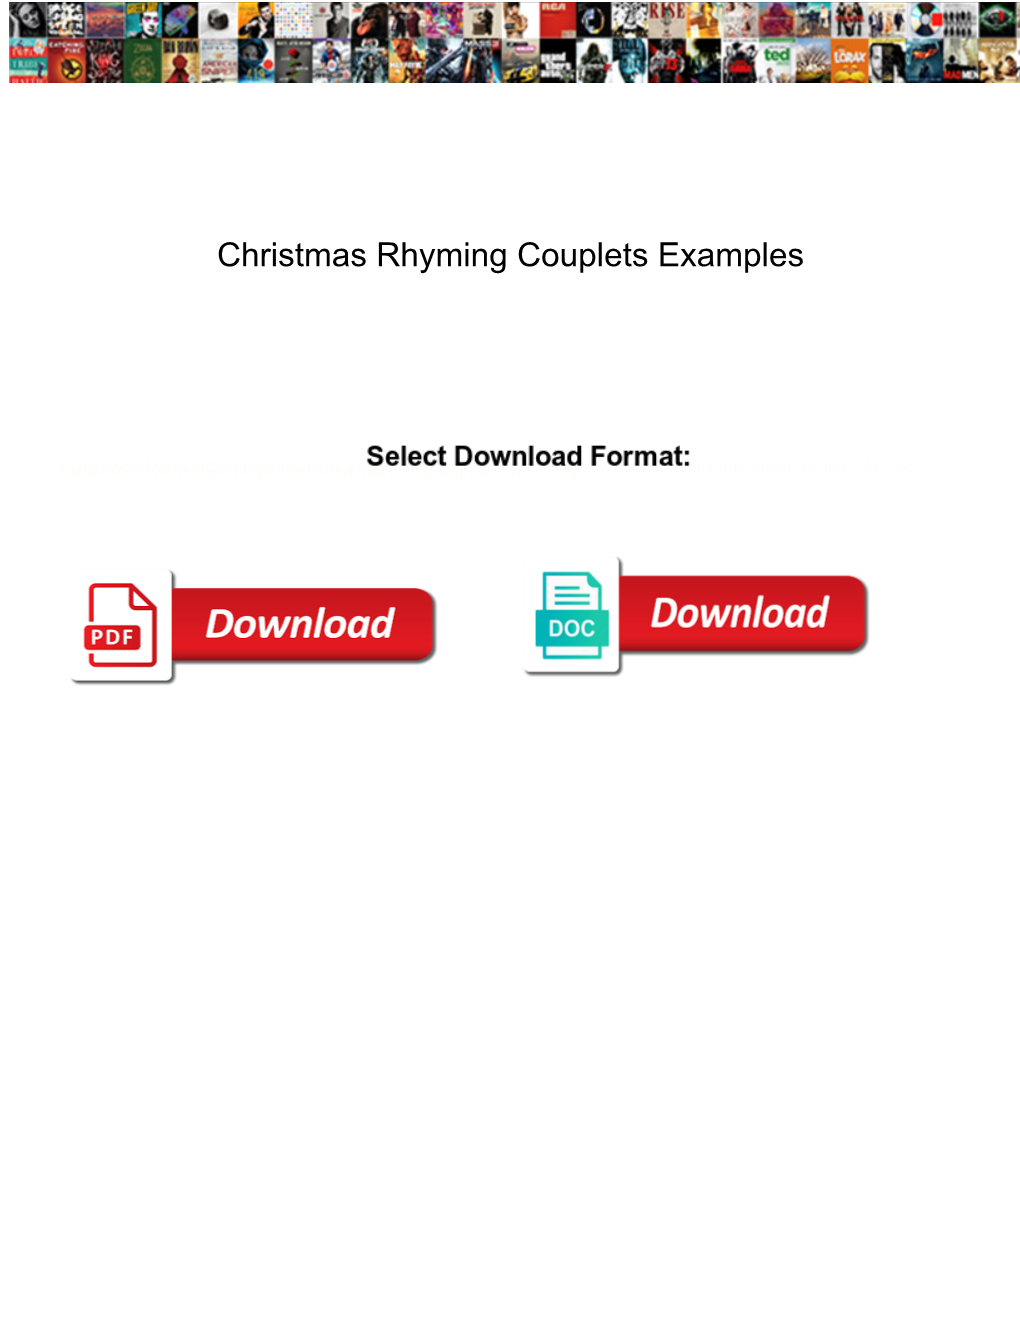 Christmas Rhyming Couplets Examples